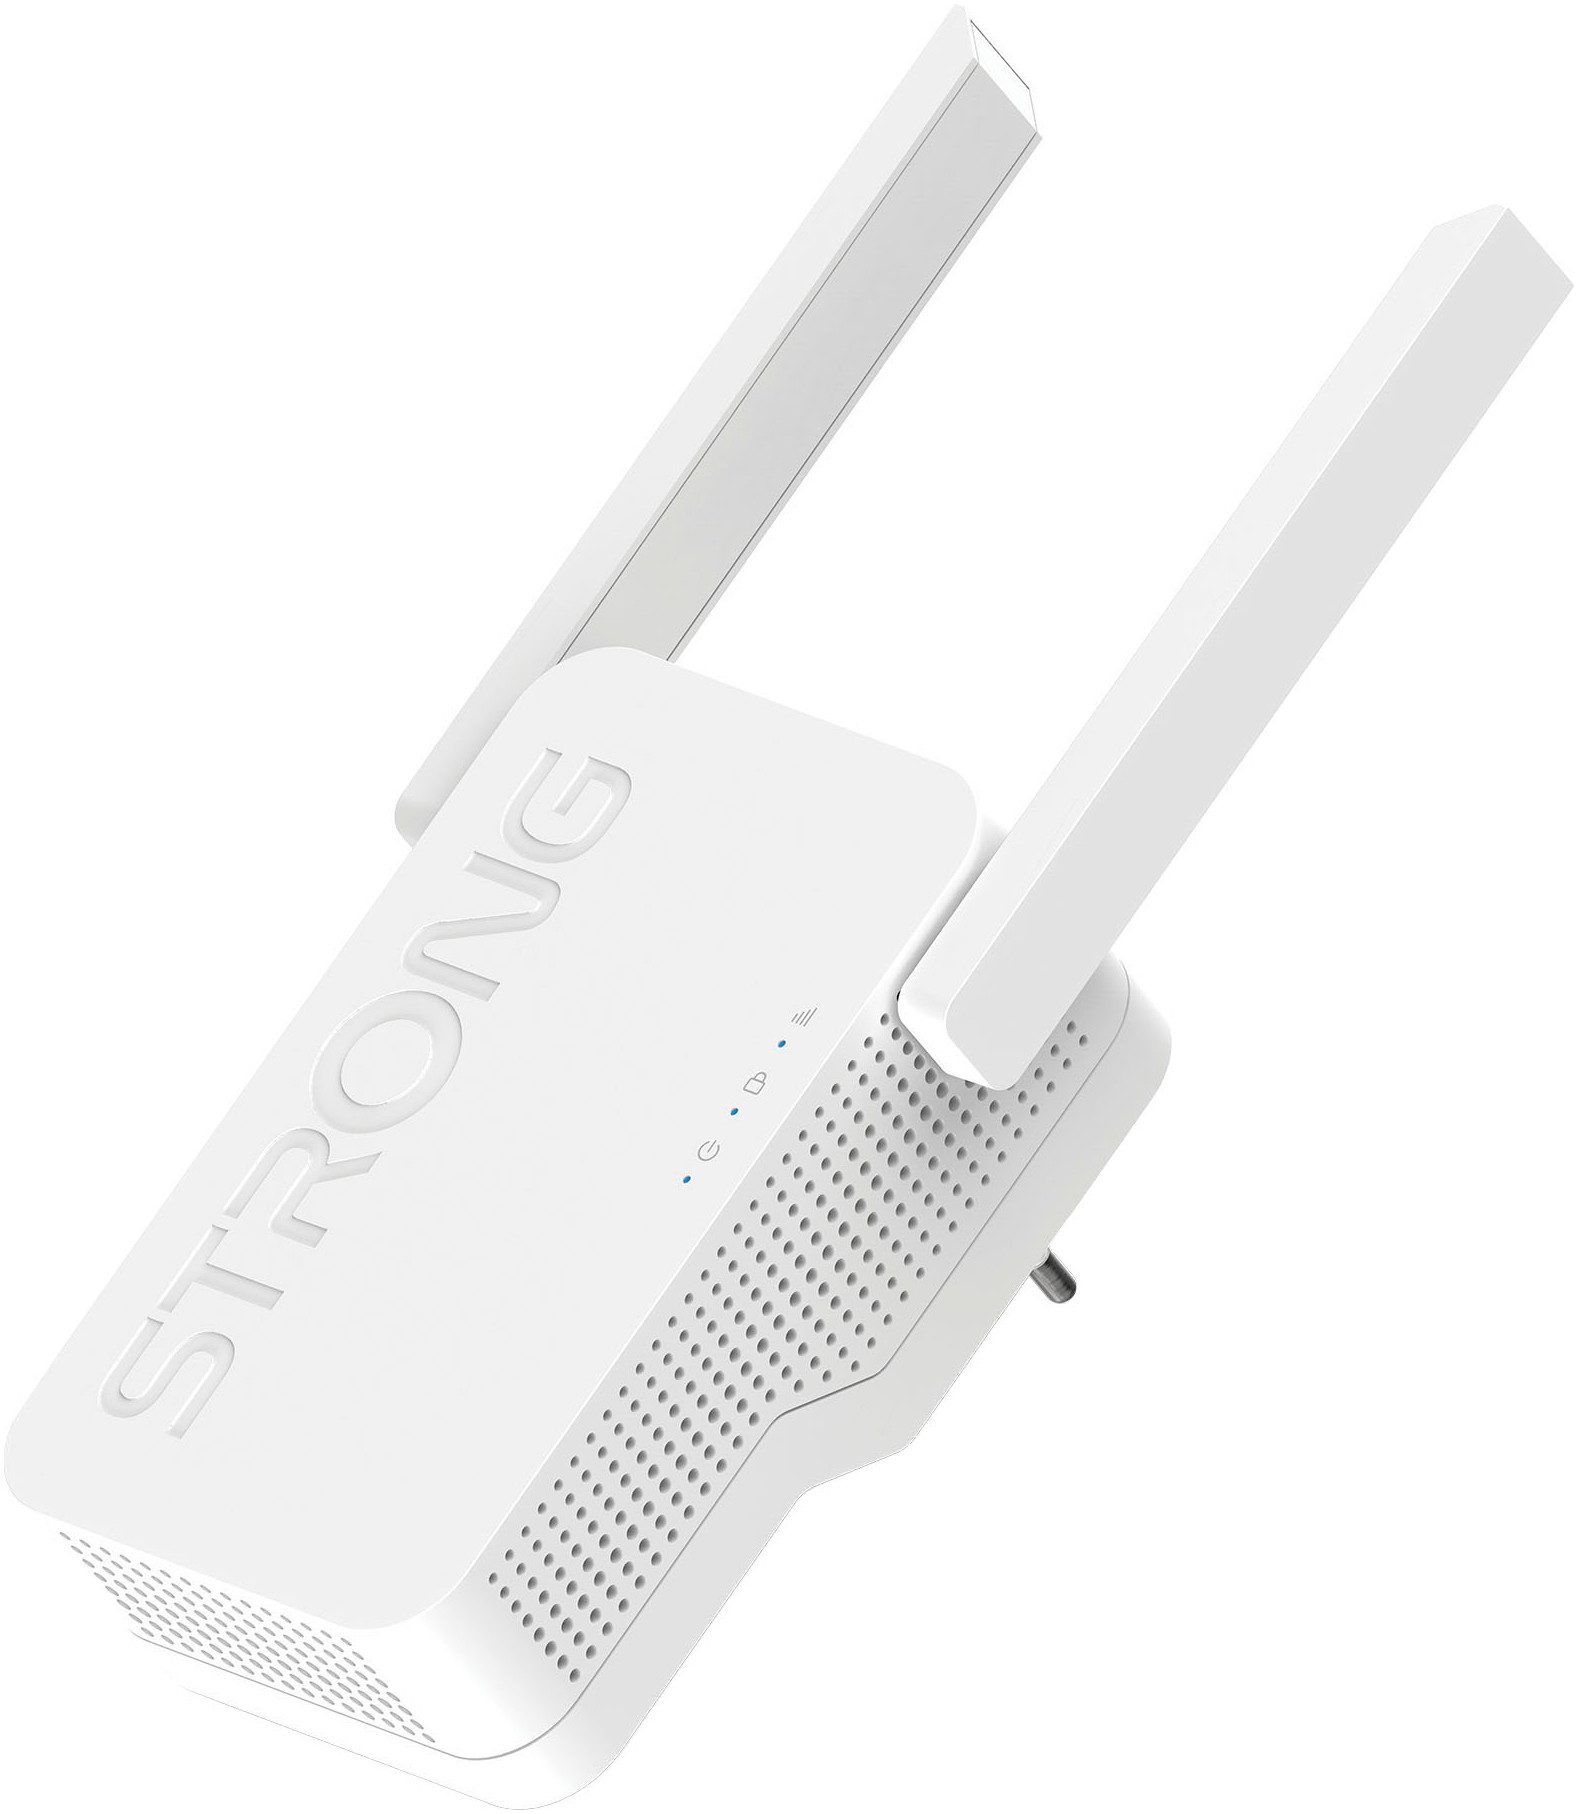 Strong Dualband WLAN Repeater bis 1800 Mbit/s, WiFi 6, Accesspoint WLAN-Repeater